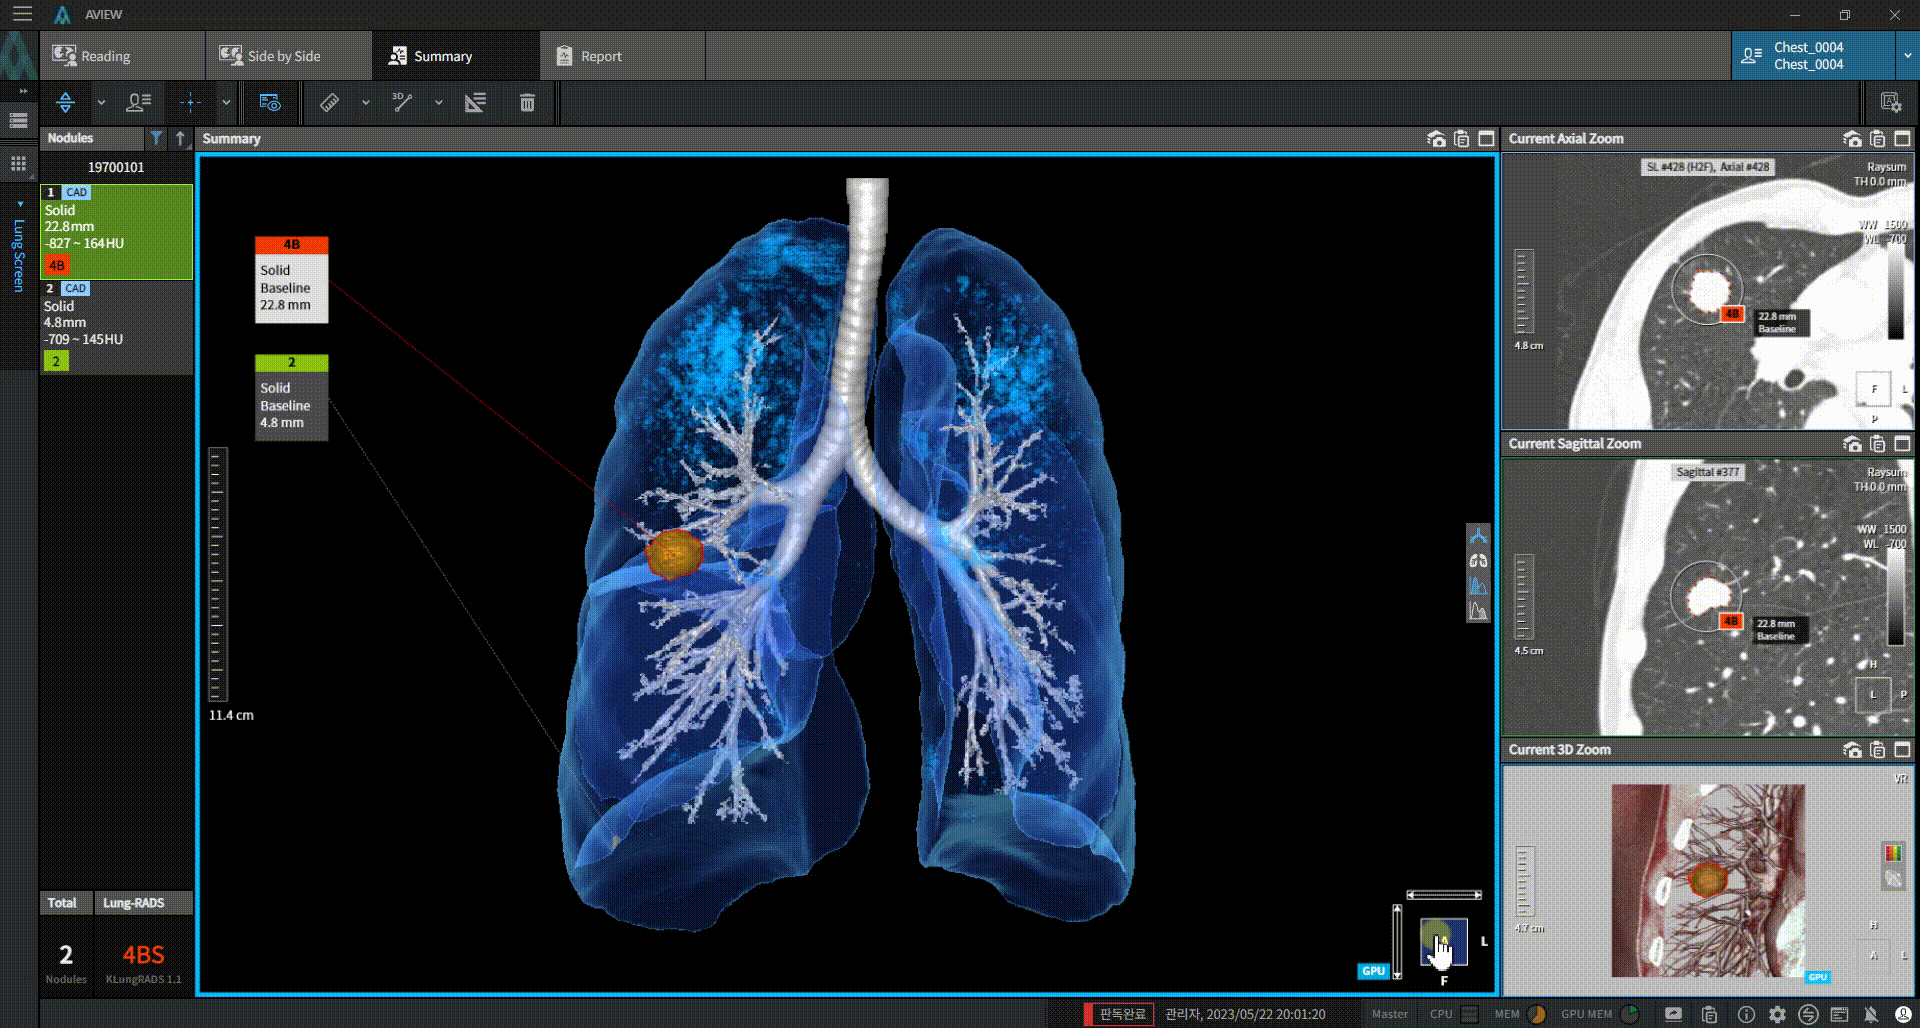 aview LCS | CT Findings are visualized in 3D, User-Friendly Viewer for Medical Professionals and Patients